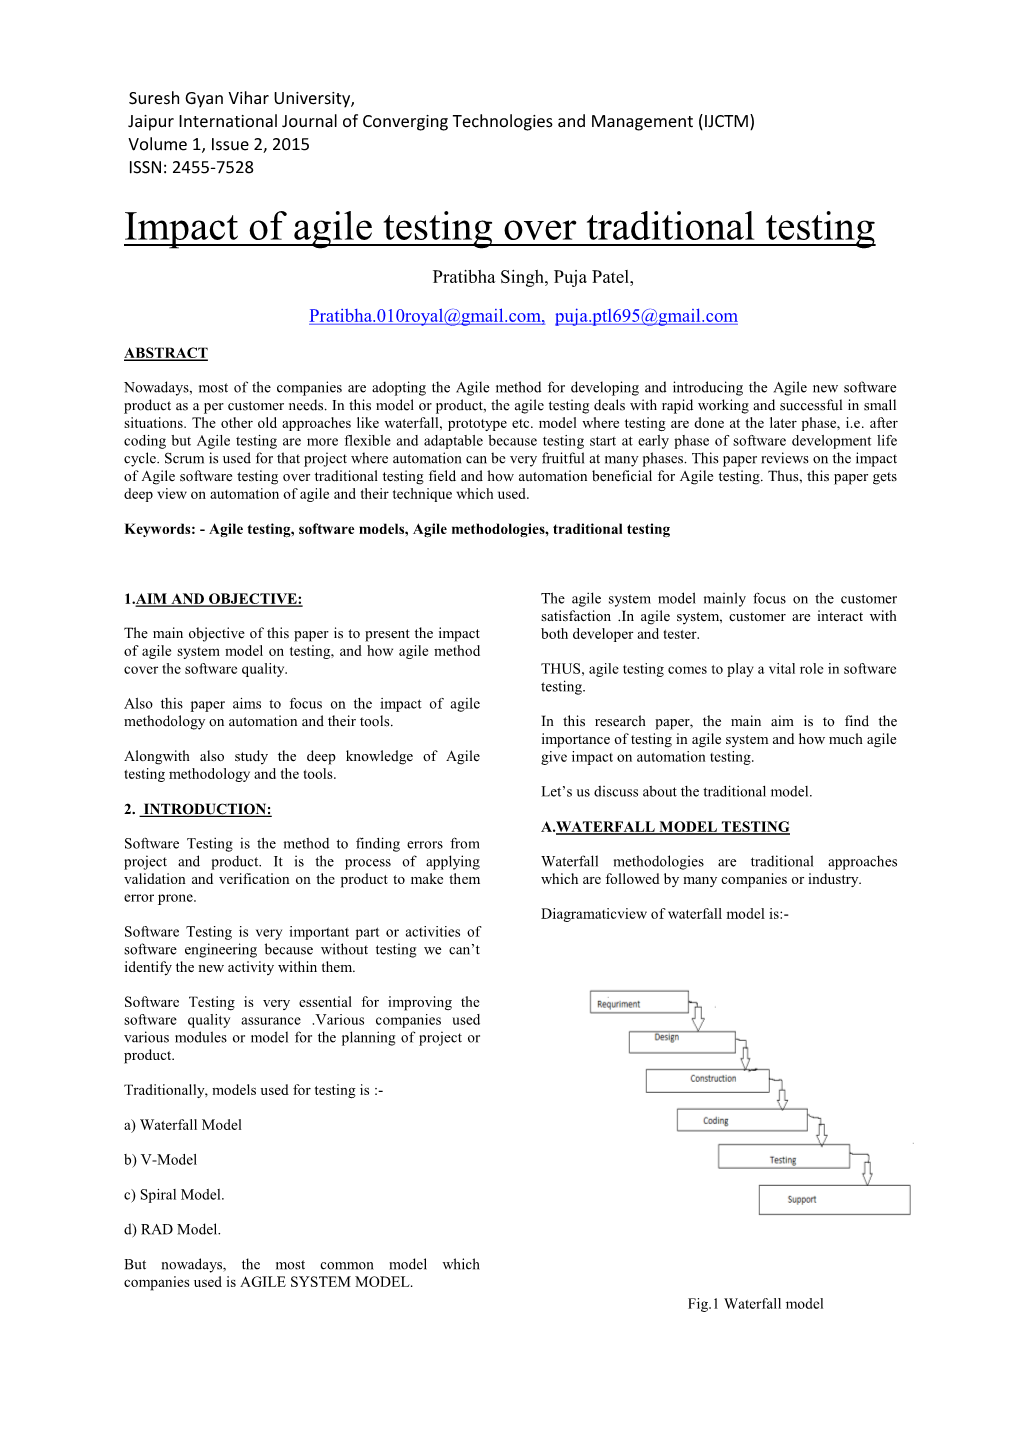 Impact of Agile Testing Over Traditional Testing